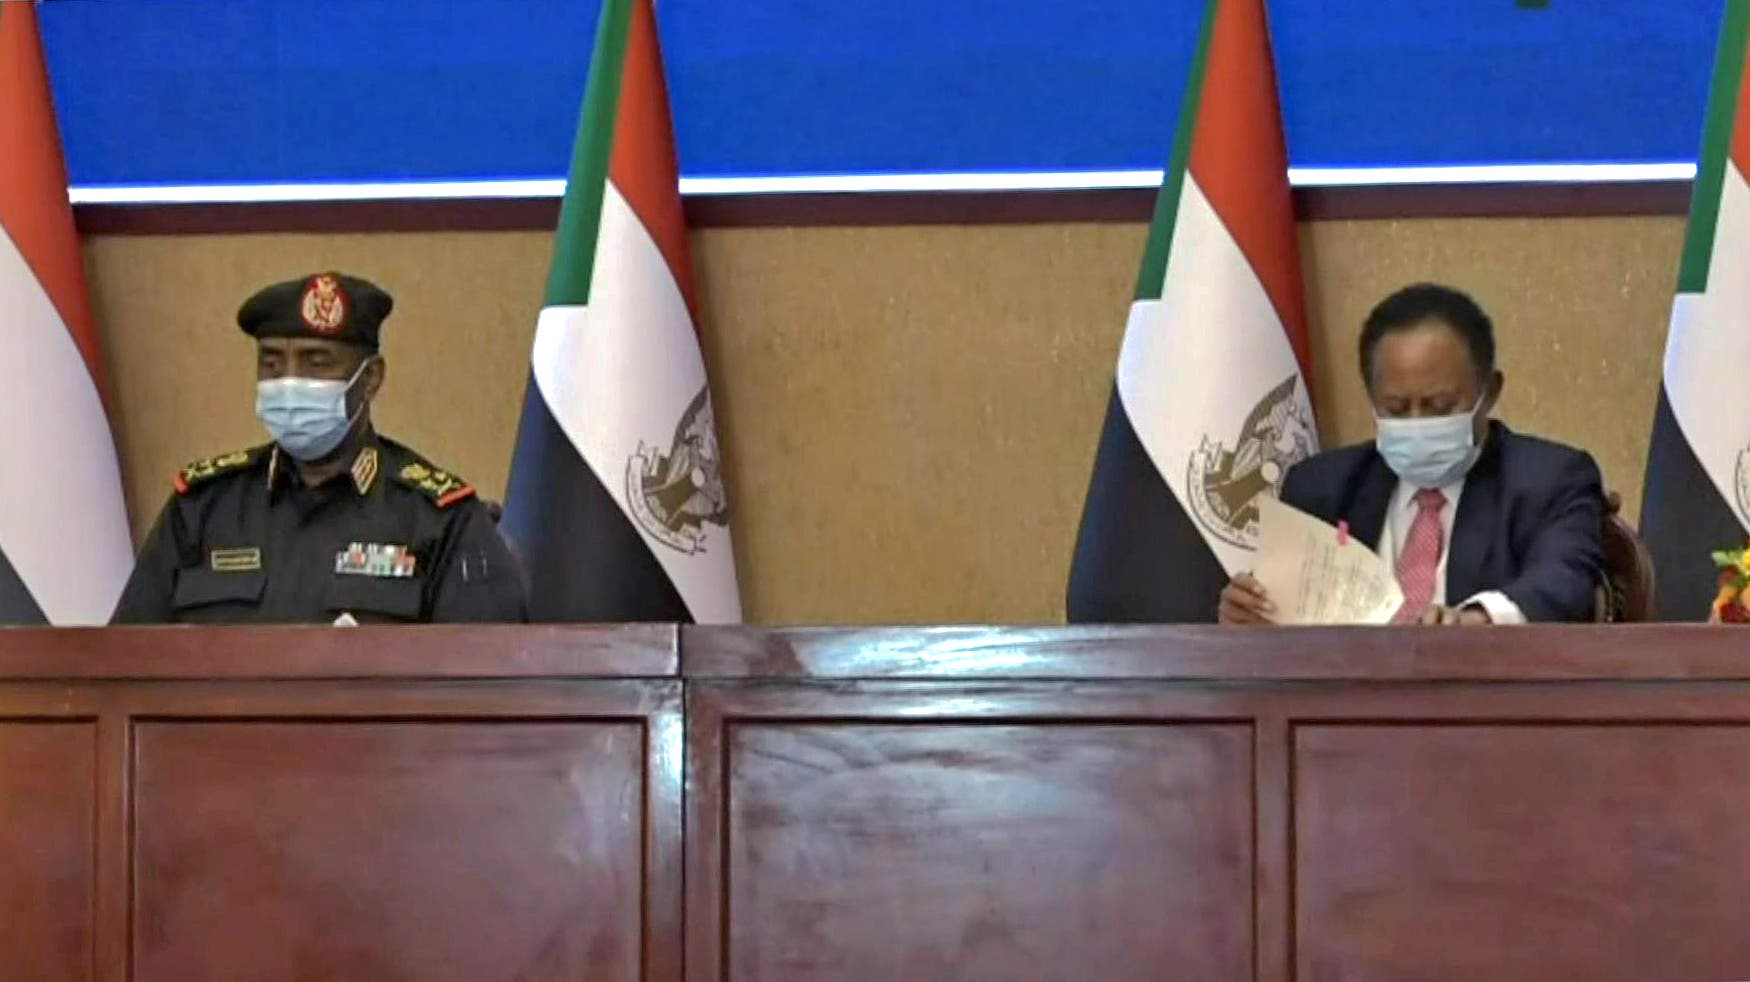 Hamdok and Al-Burhan during the signing ceremony of the political agreement in Khartoum (AFP)